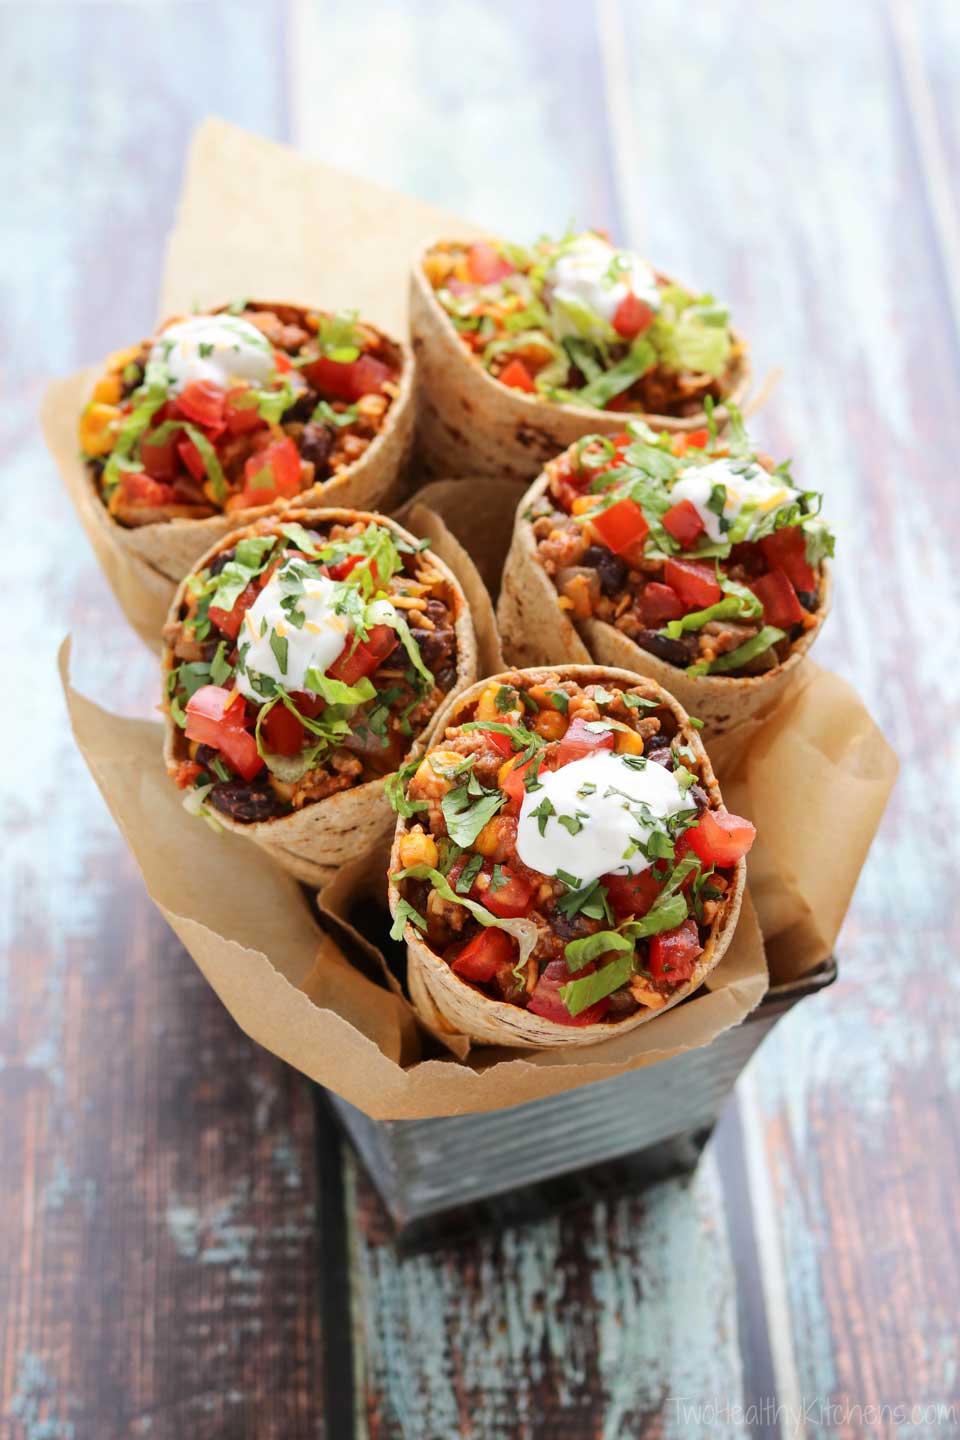 Our Taco Cones recipe is so much fun! A delicious, healthy beef taco recipe you can take on the go! Totally portable!